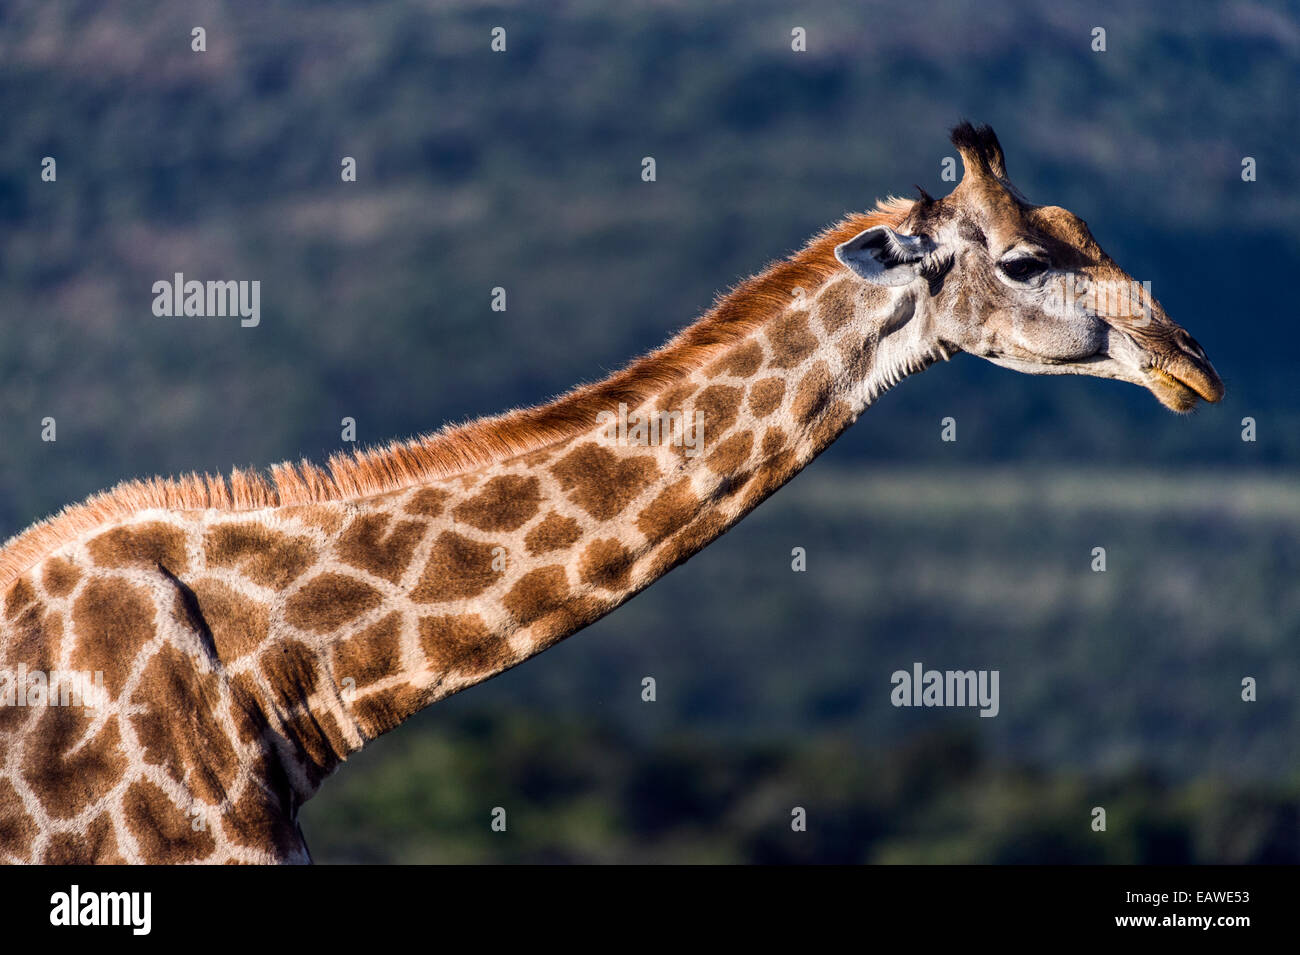 The long neck of a South African Giraffe chewing its cud. Stock Photo